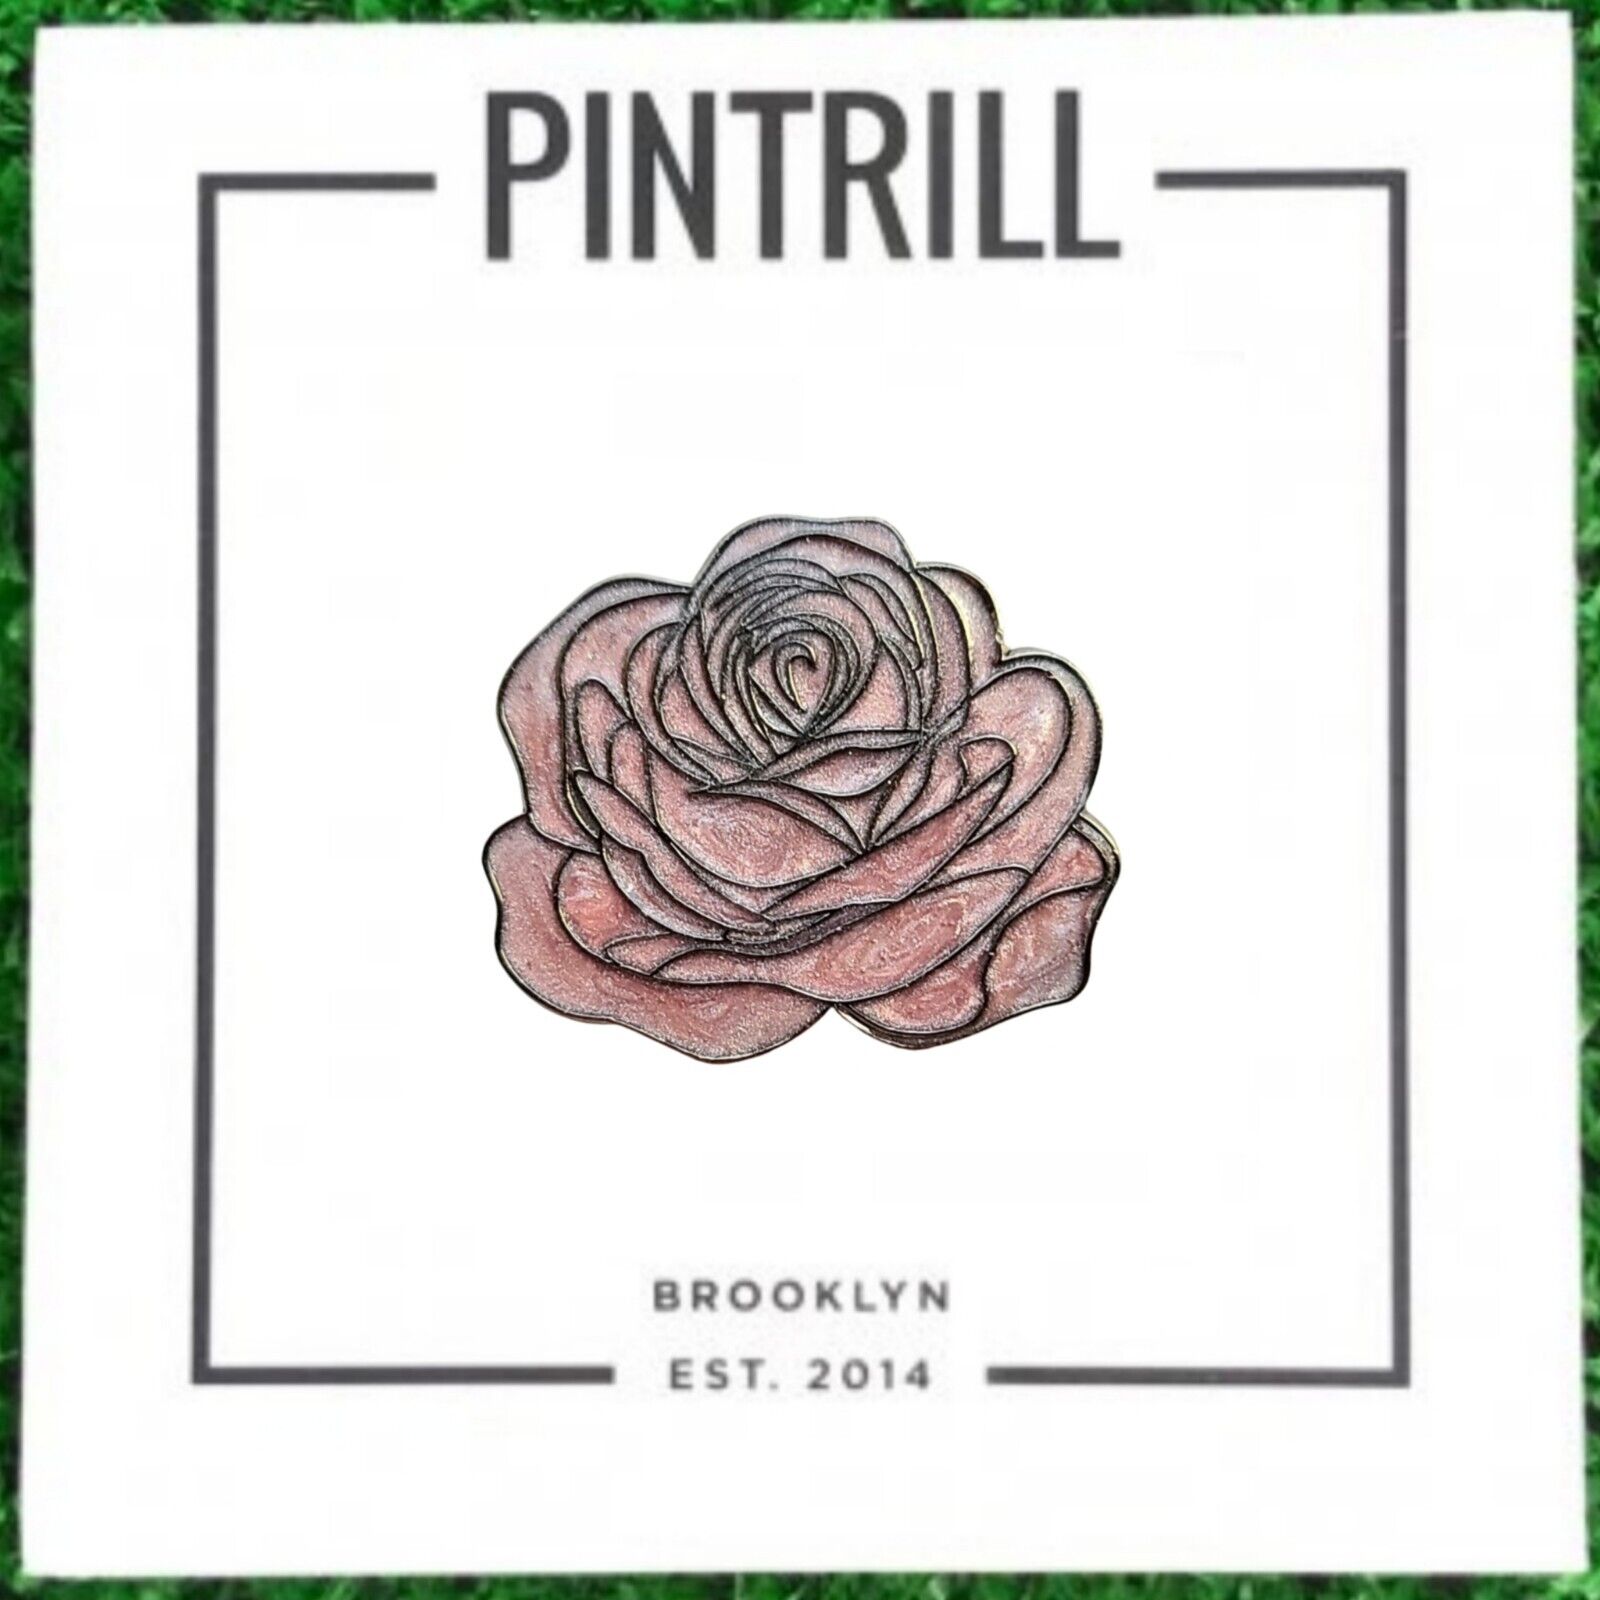 ⚡RARE⚡ PINTRILL Glittered Pink Rose Pin *BRAND NEW* 2016 LIMITED EDITION 🌹